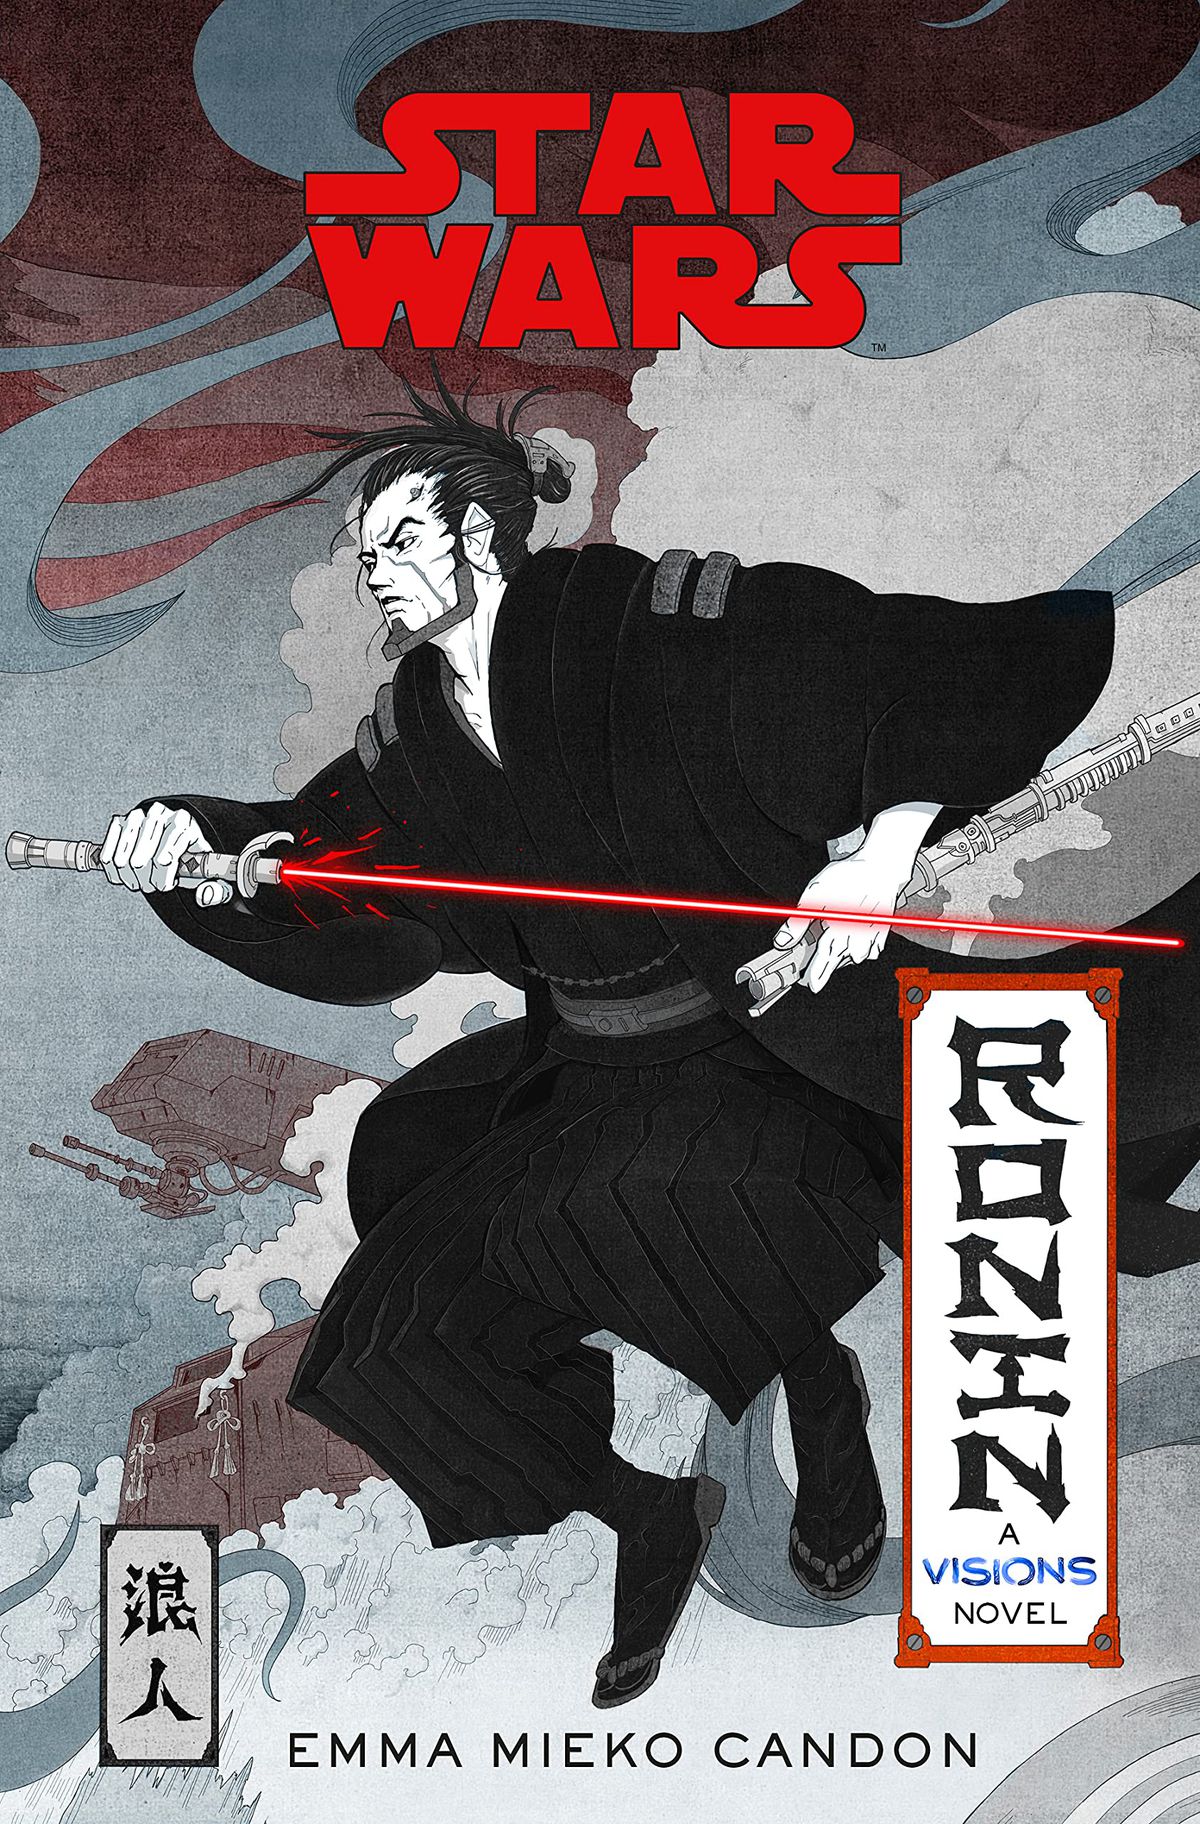 Star Wars Visions: Ronin by Emma Mieko Candon book cover featuring a samurai jedi with a red lightsaber